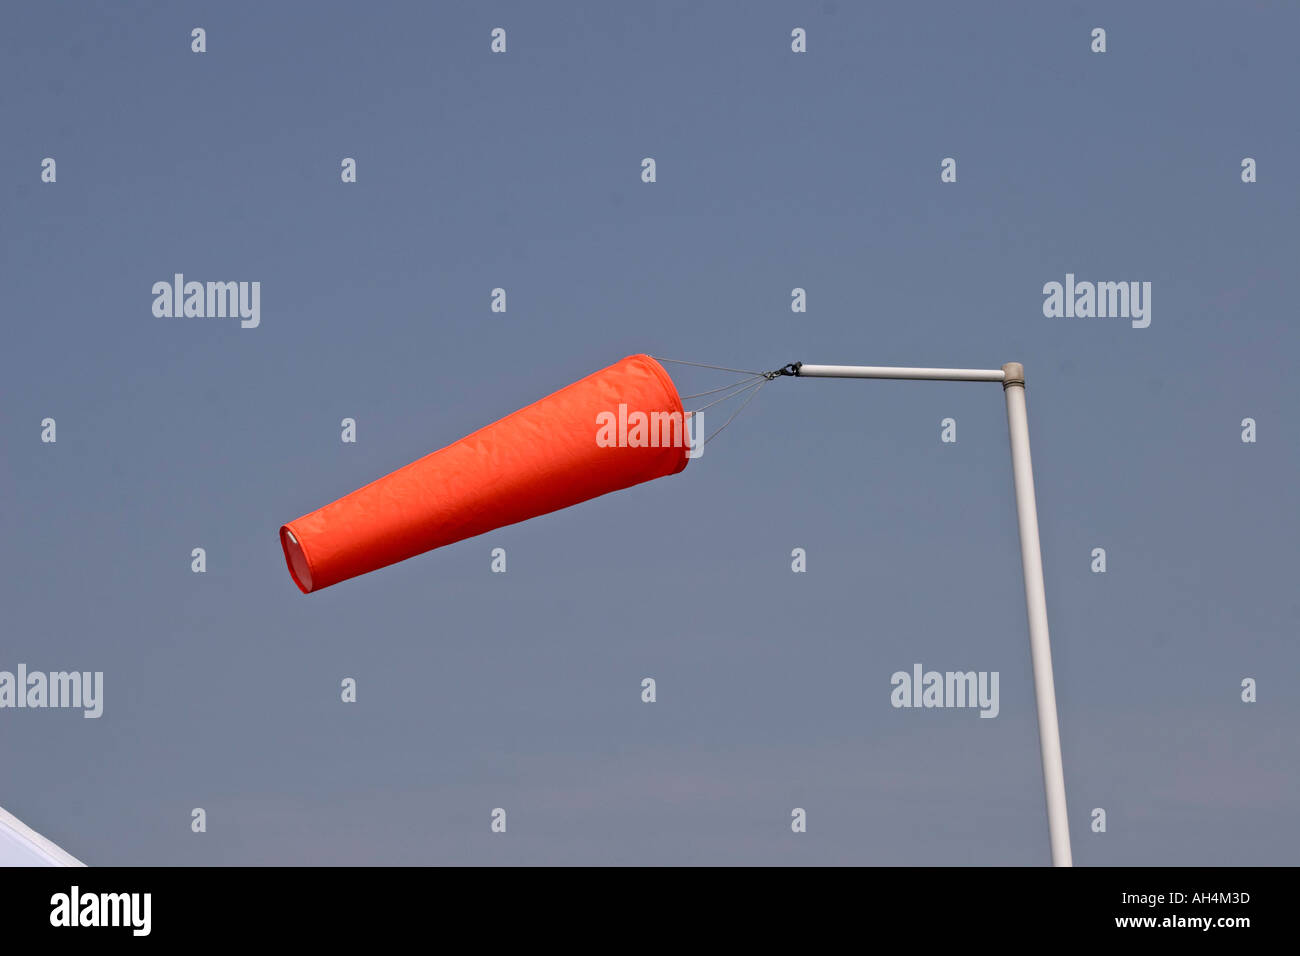 Wind sock for measuring wind speed and direction using venturi effect Stock Photo